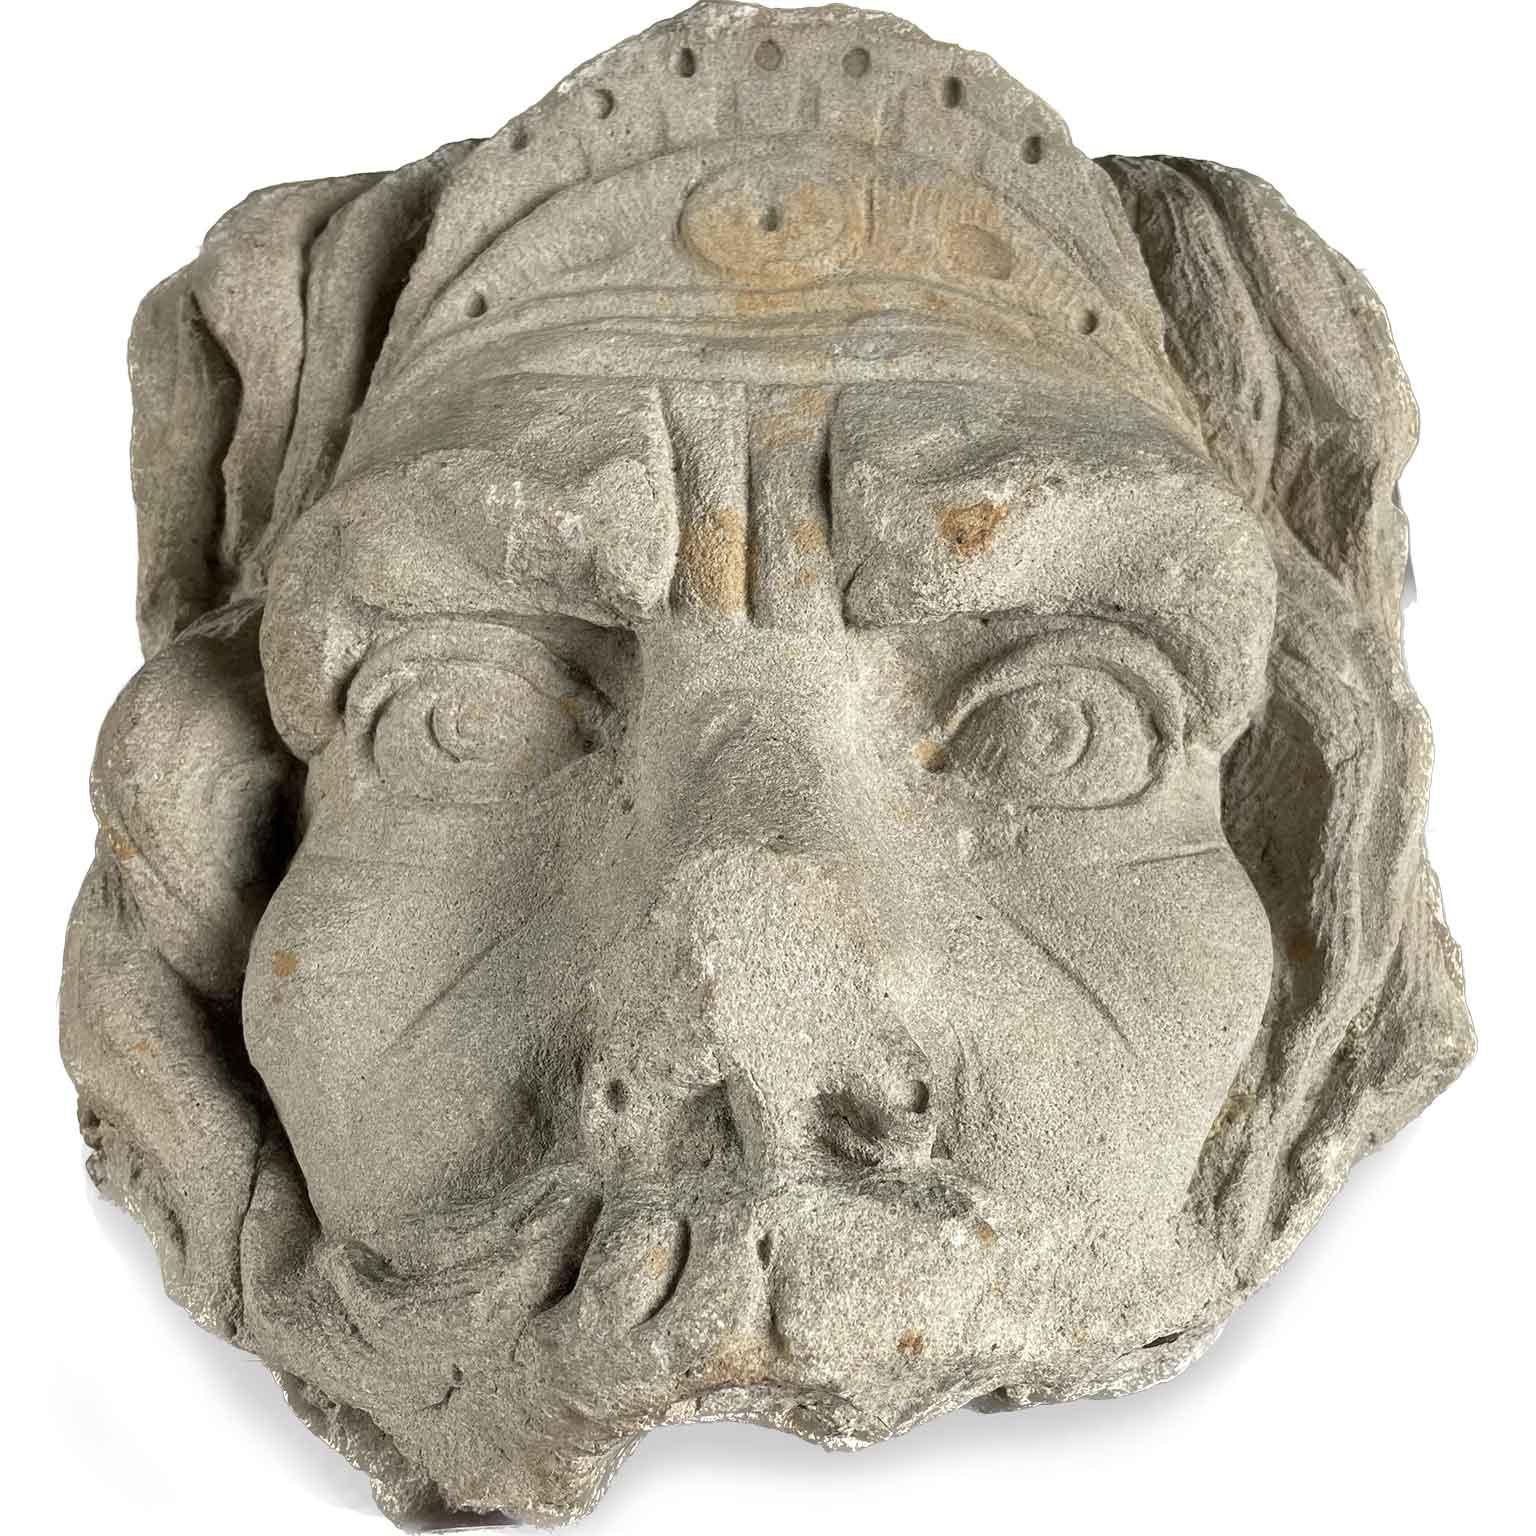 This antique stone mask was probably used in a fountain. It is a very decorative Italian antique object. The mask fits as decorative object on a bureau or placed somewhere else in a living space. This mask depicts a lion head or a moustached male